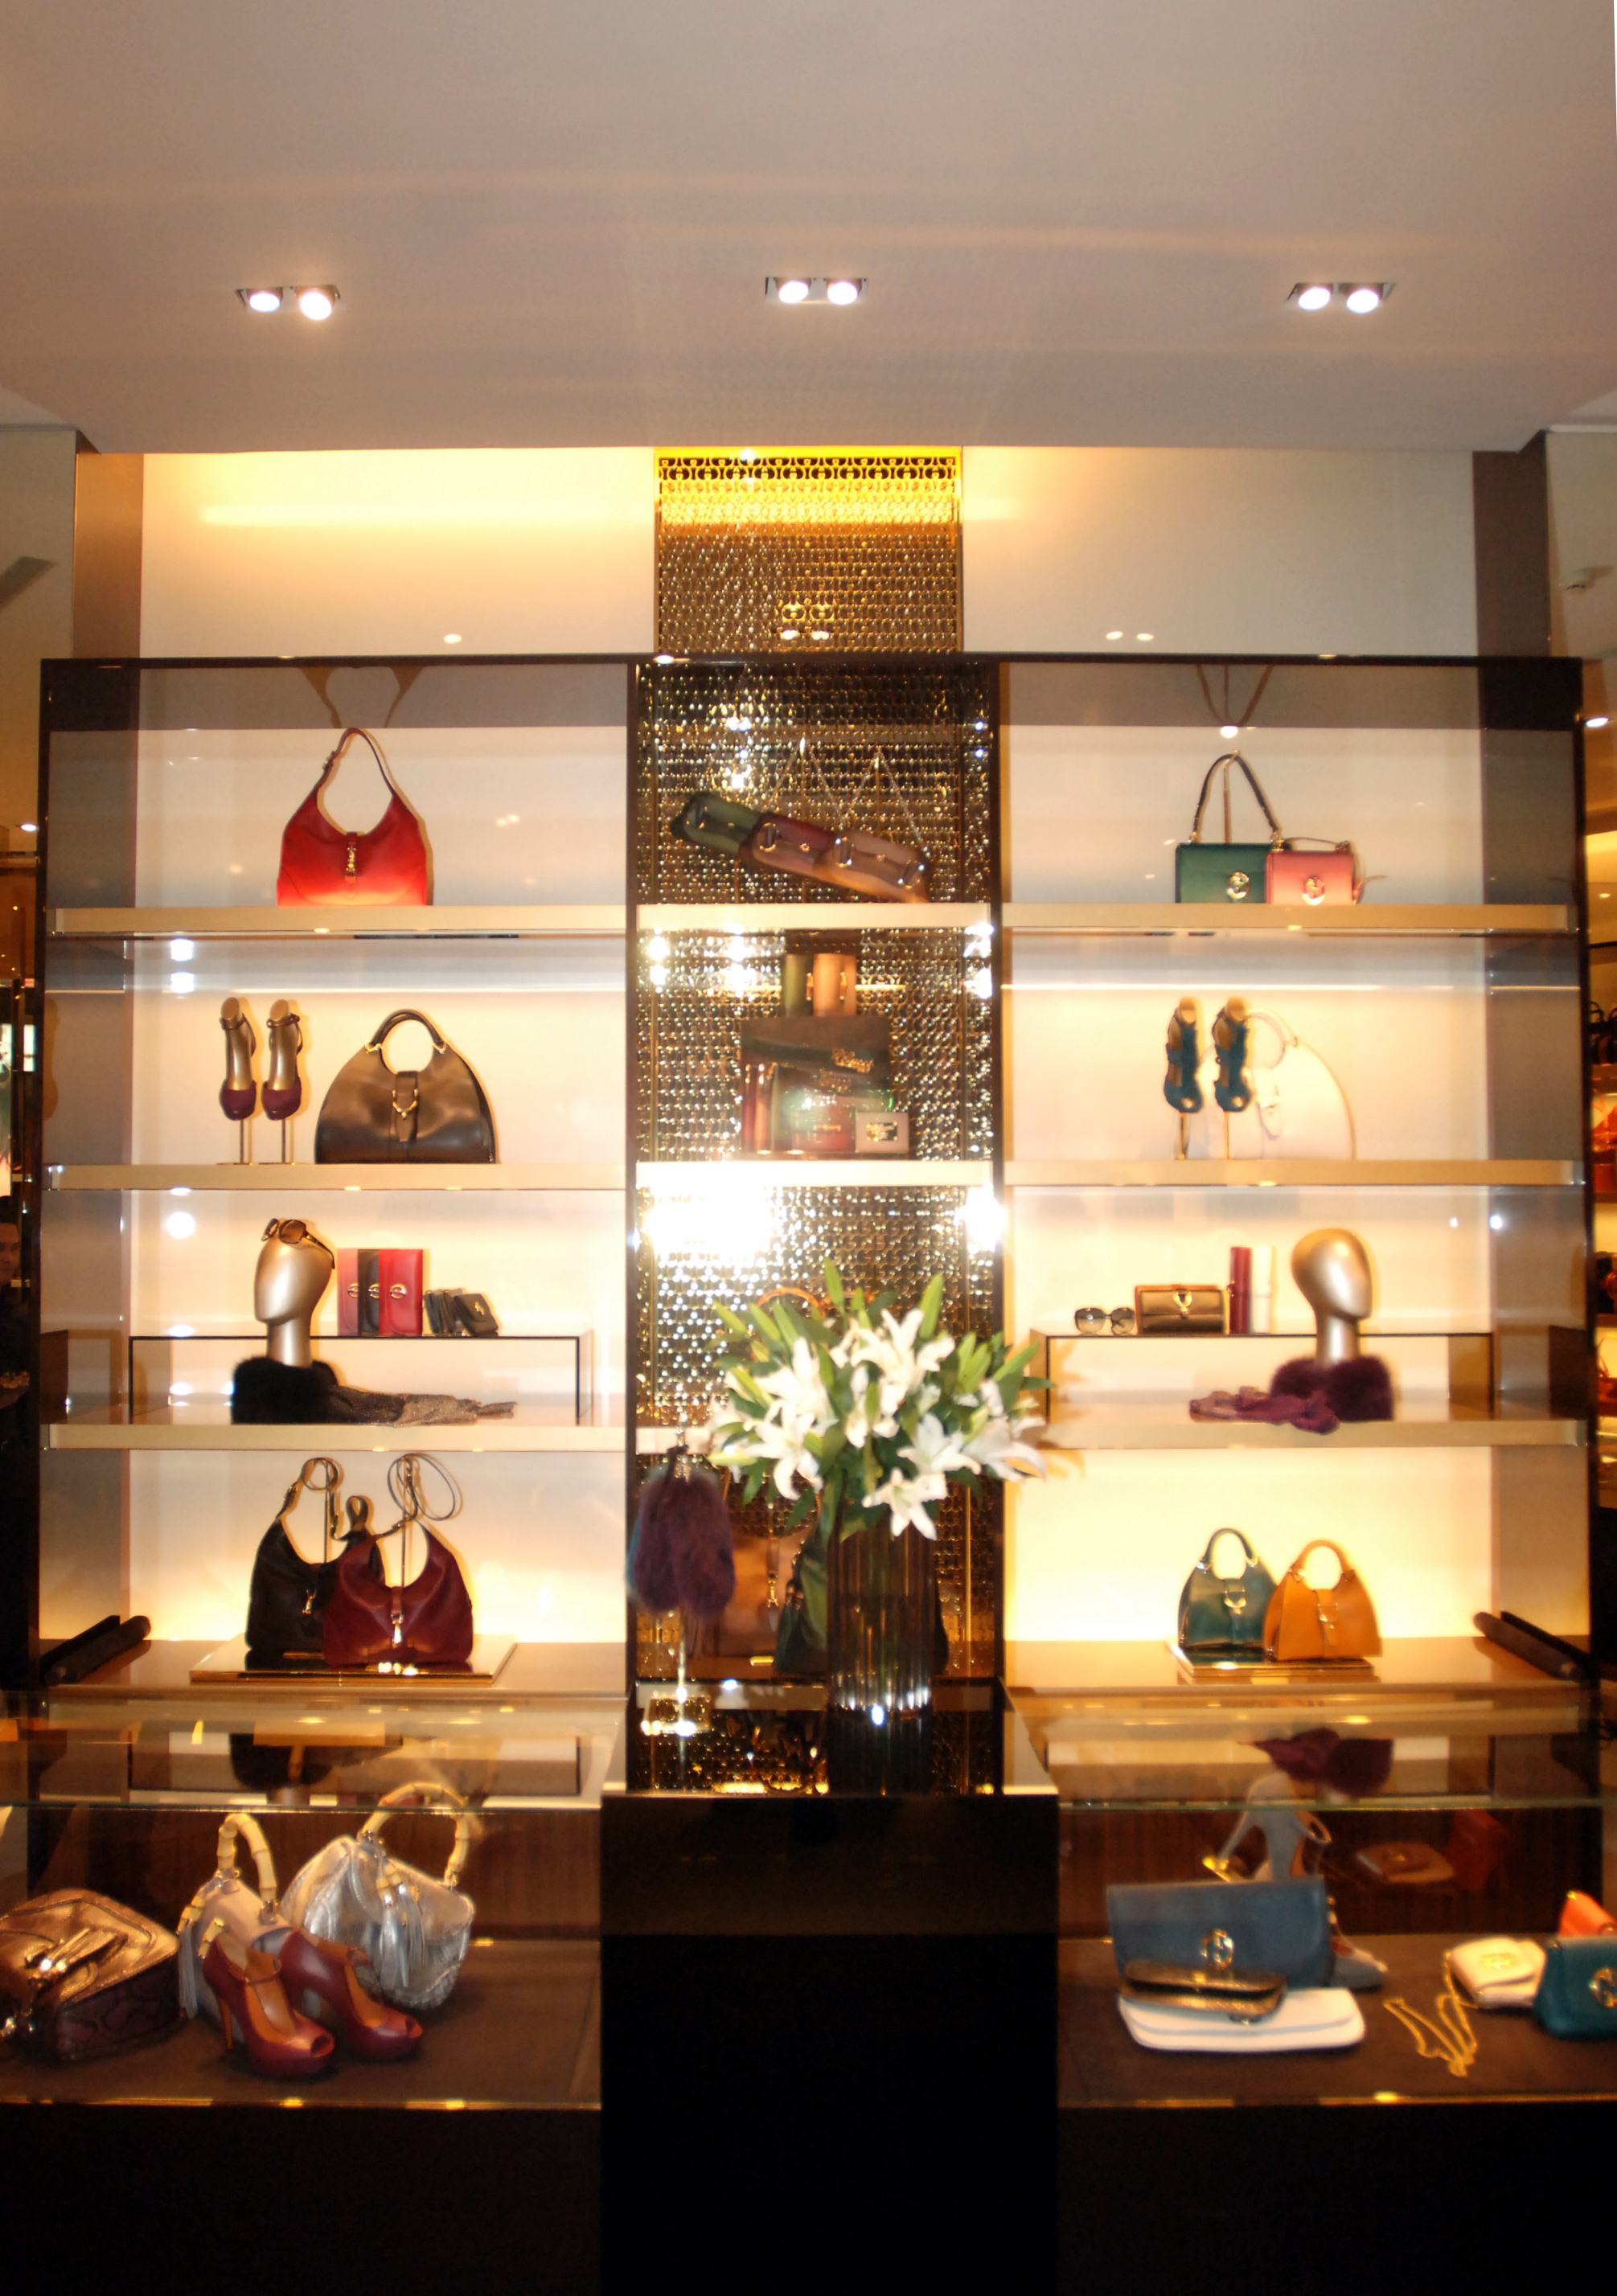 LOOK! New Gucci boutique opens in Makati